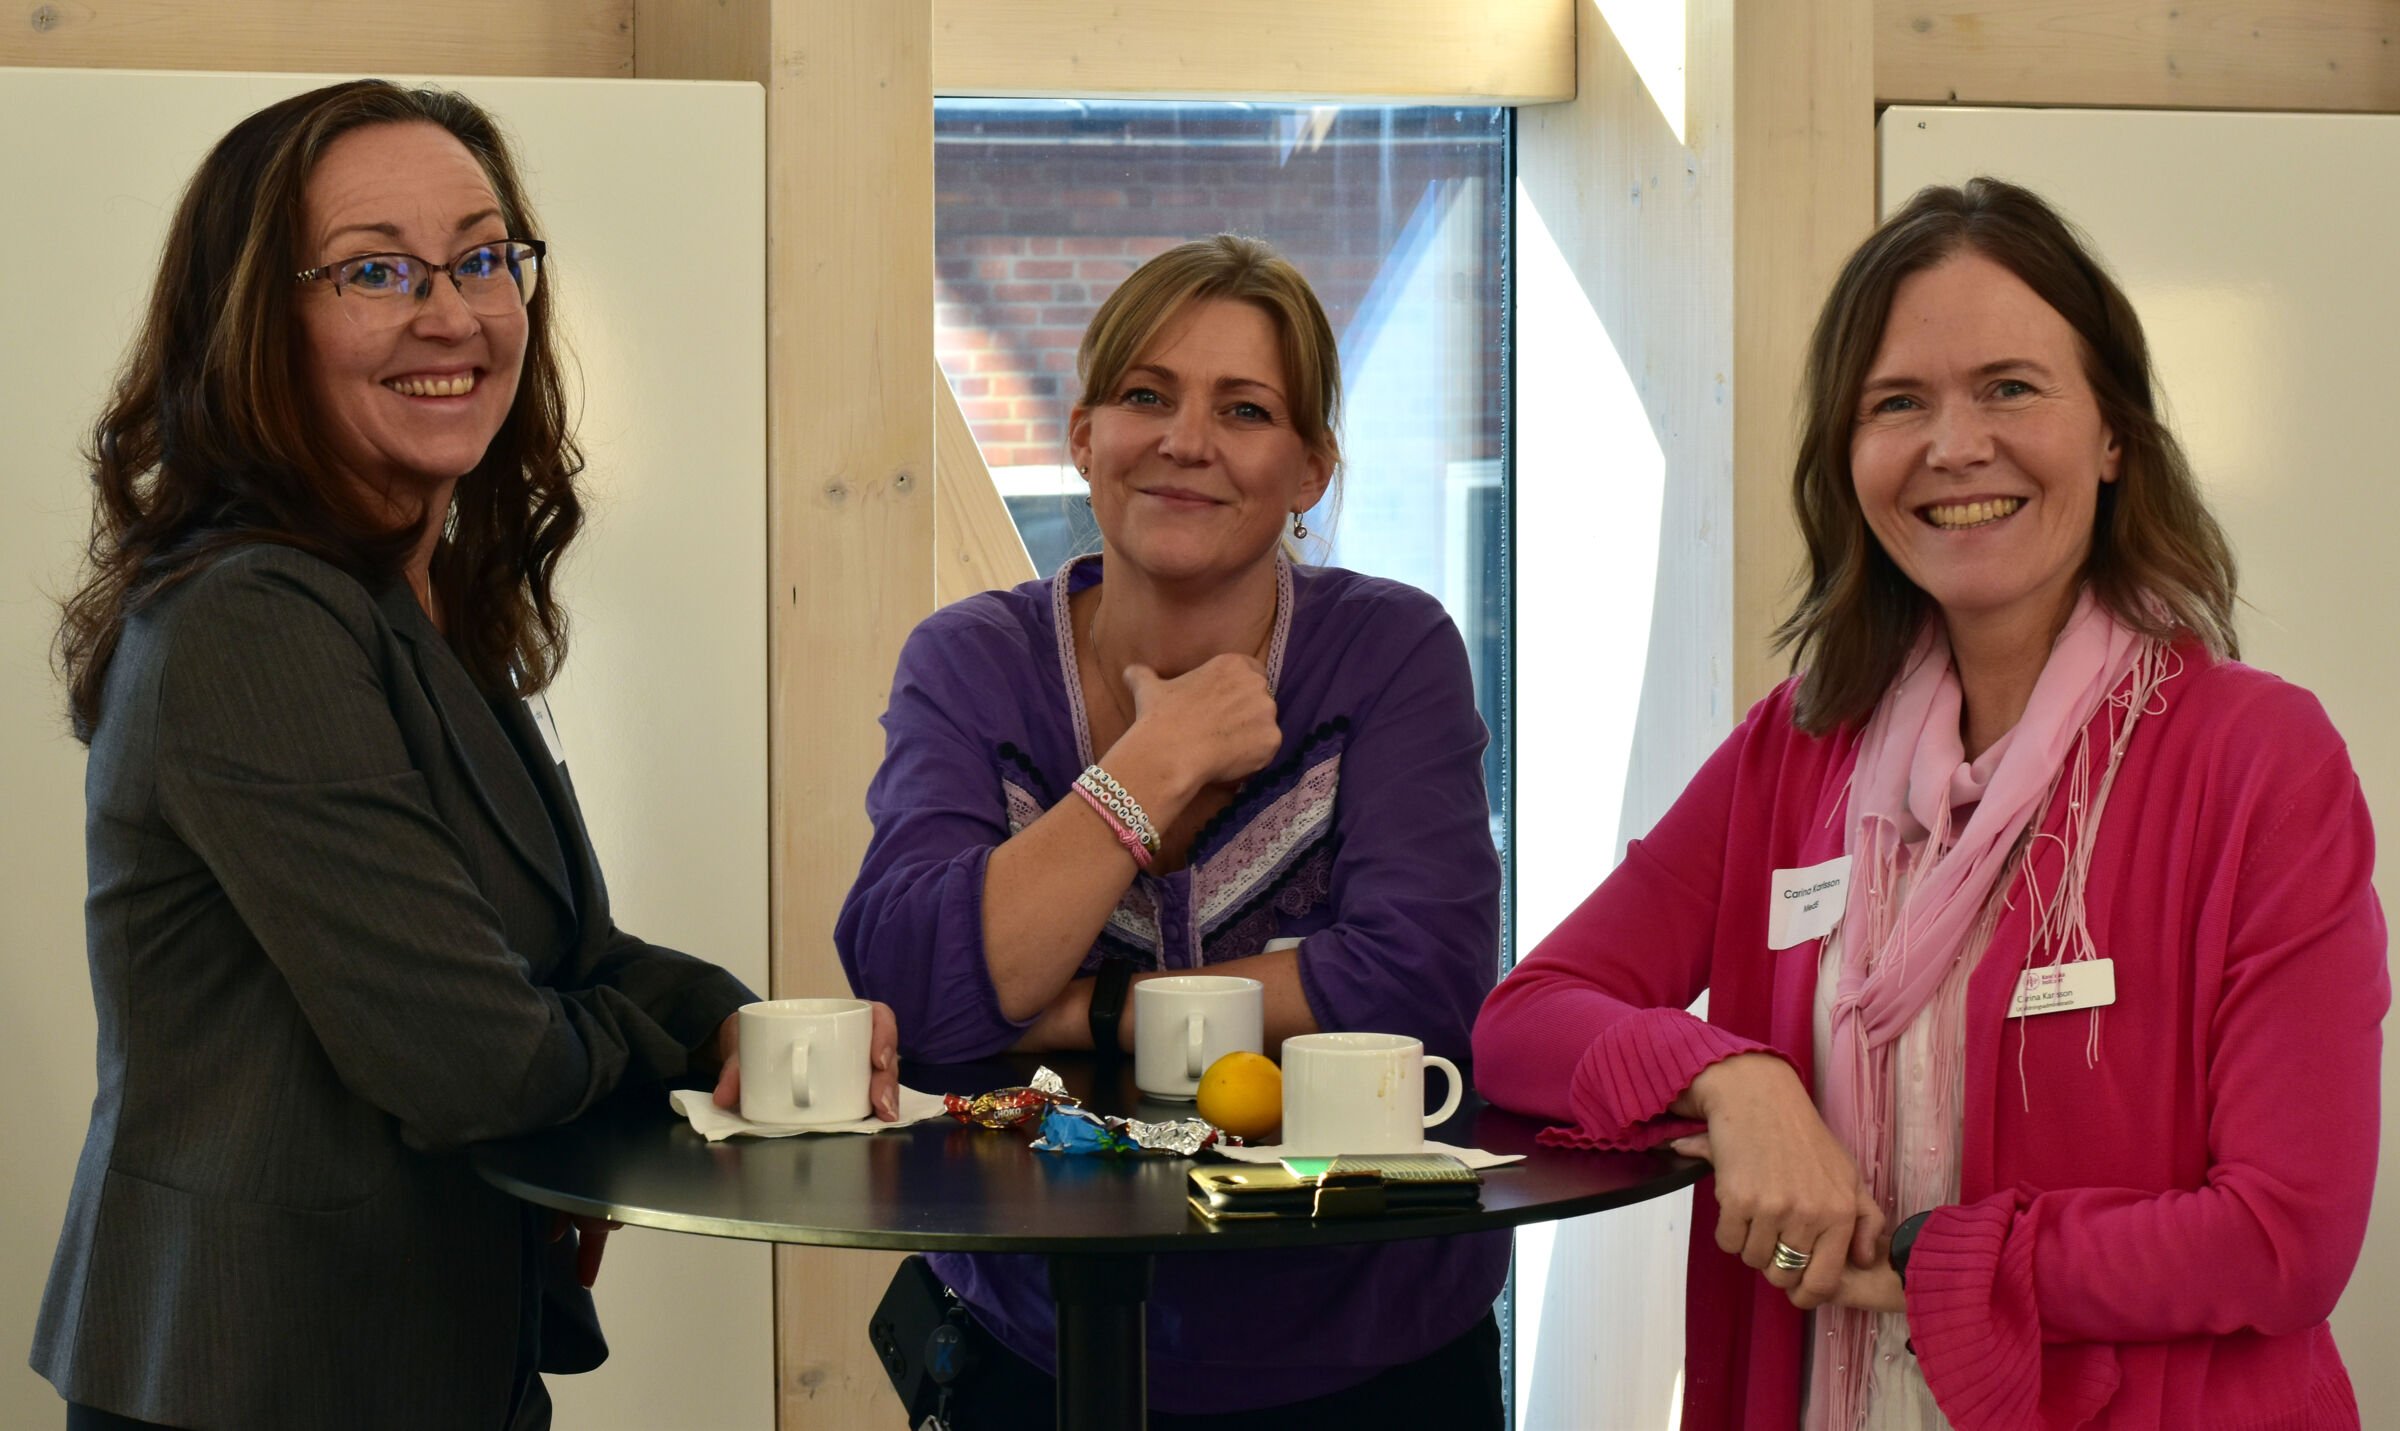 Three of the participants on the coffee break.